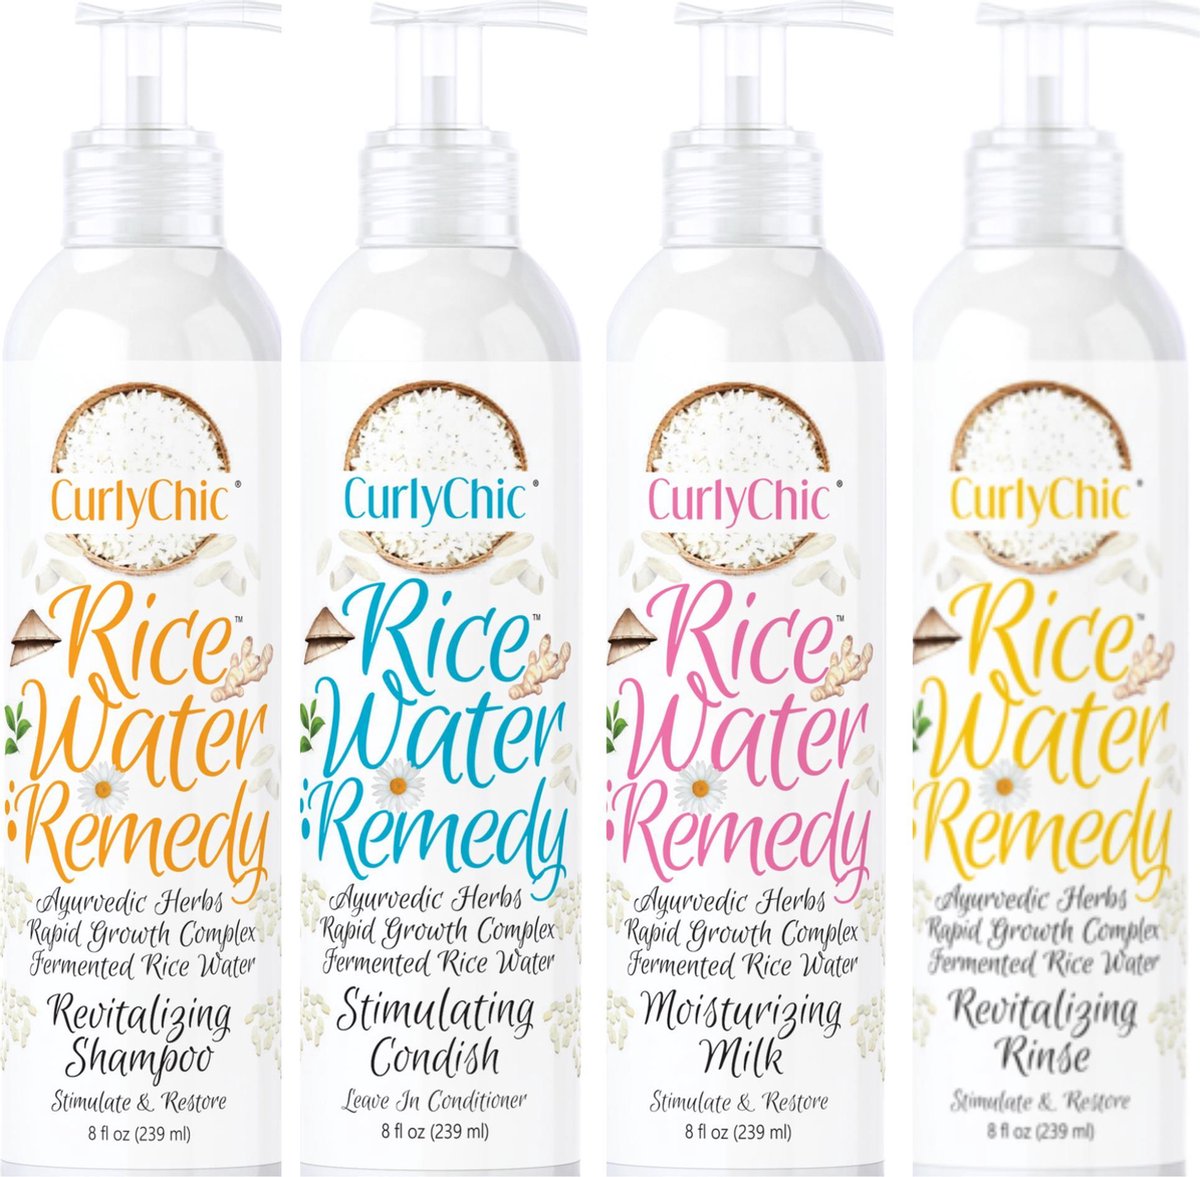 Curly Chic Rice Water Remedy Sulfate free. No parabens, 4 pc SET